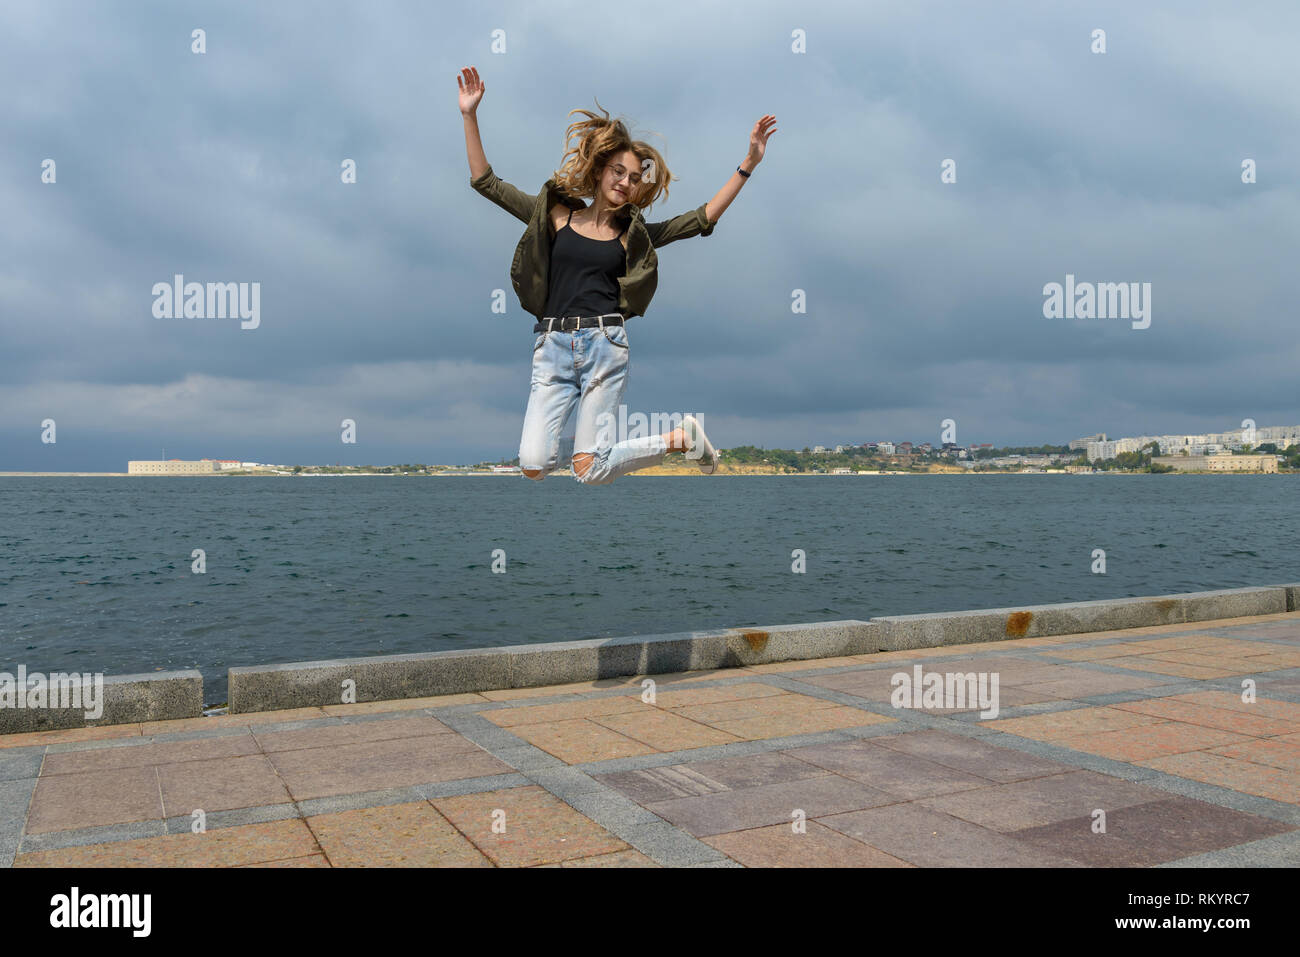 Young girl in a jump shot against the sea Stock Photo